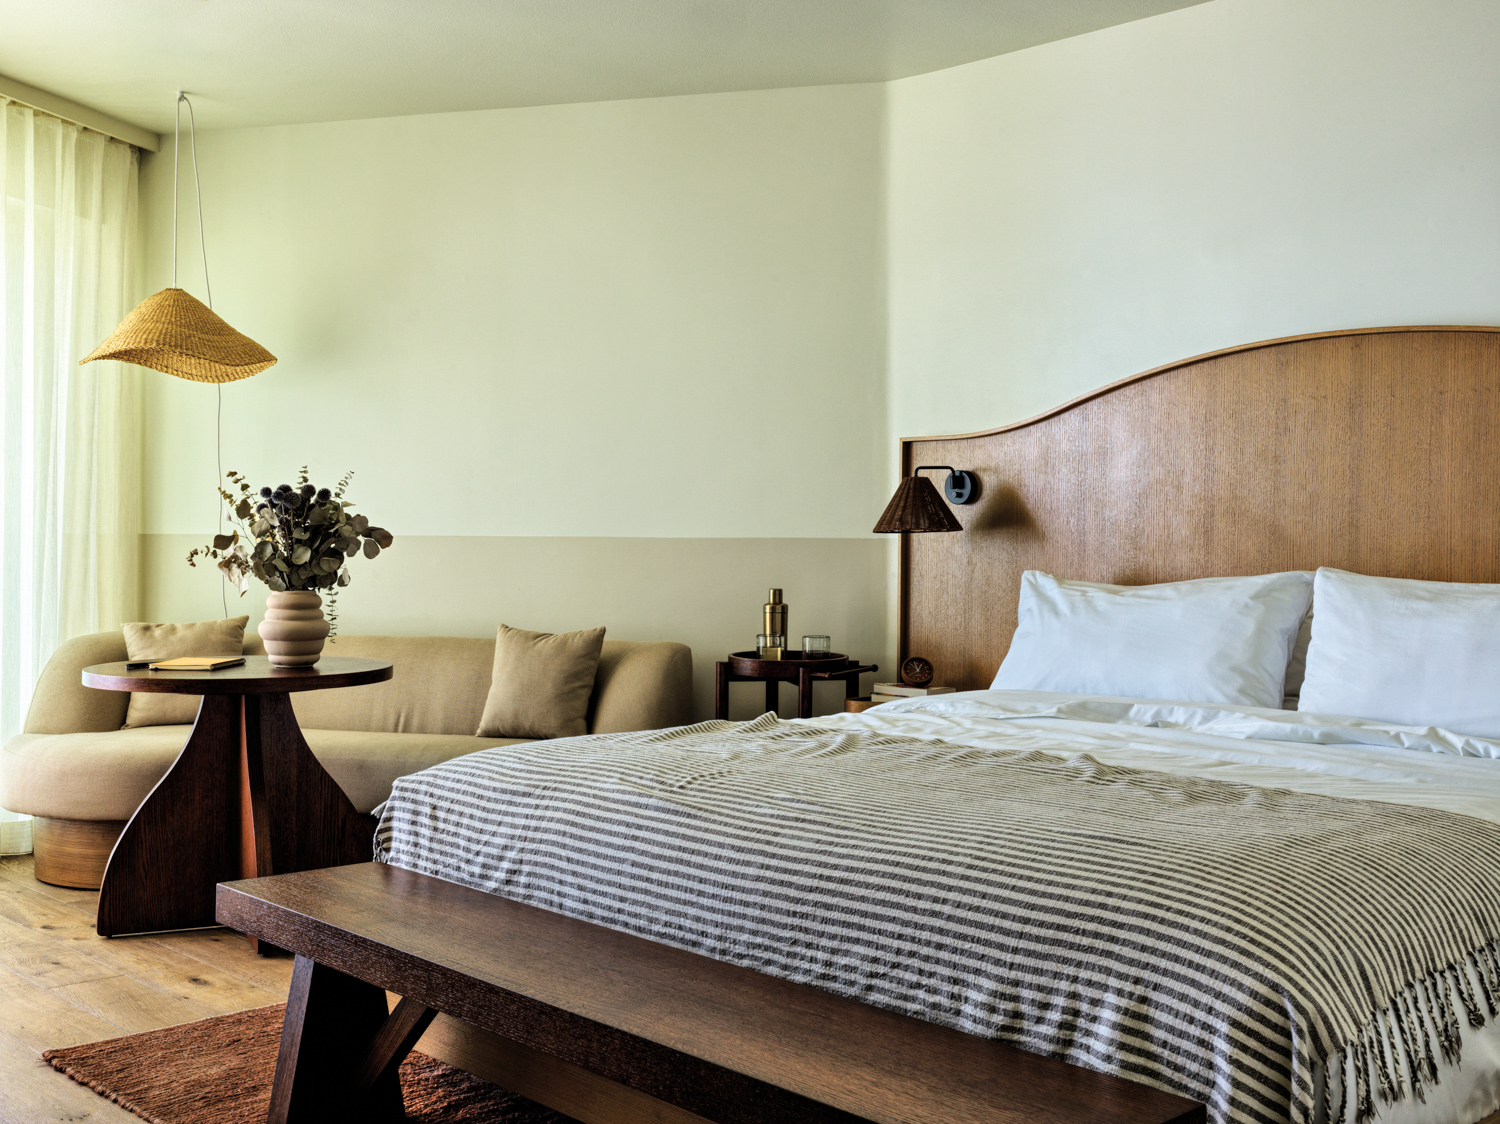 hotel bedroom featuring a wooden headboard and bench framing a bed with striped bedding